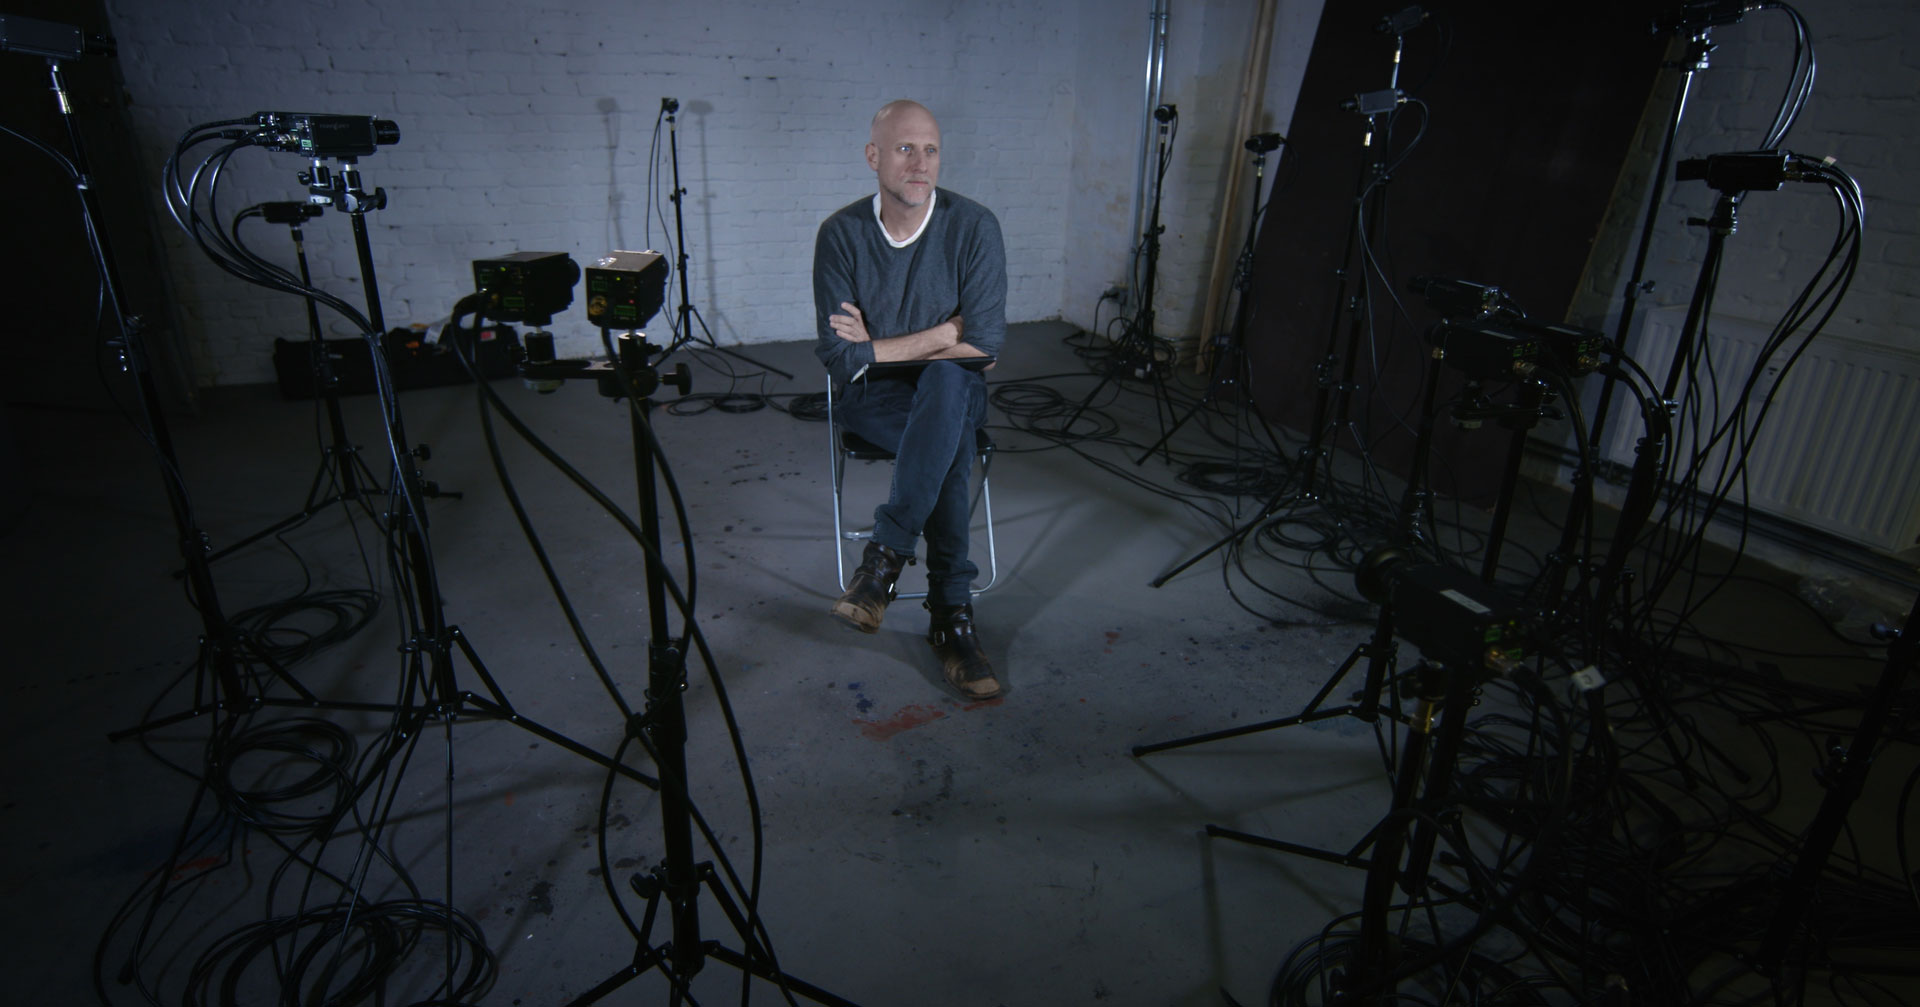 artist-trvor-paglen-in-his-berlin-studio-surrounded-by-cameras-and-technology-arms-crossed